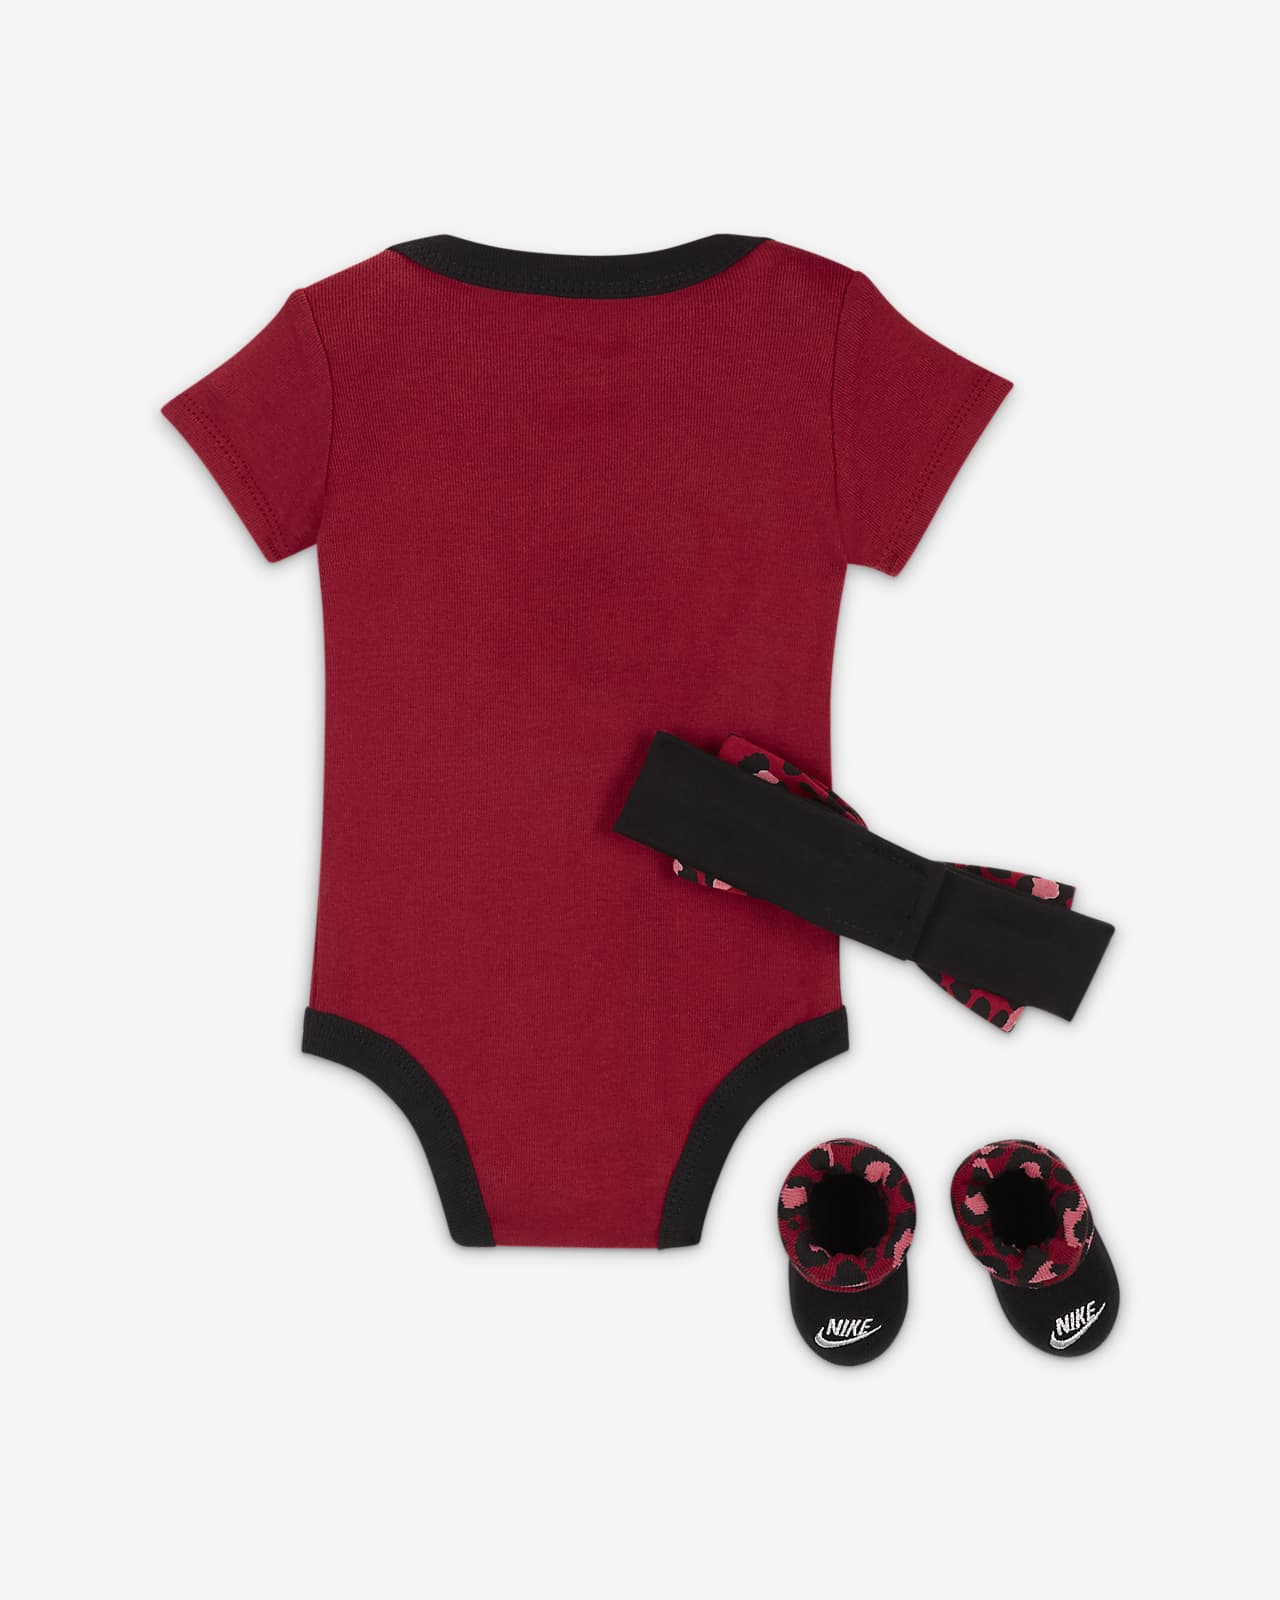 Nike Join the Club 3-Piece Boxed Set Baby 3-Piece Bodysuit Set